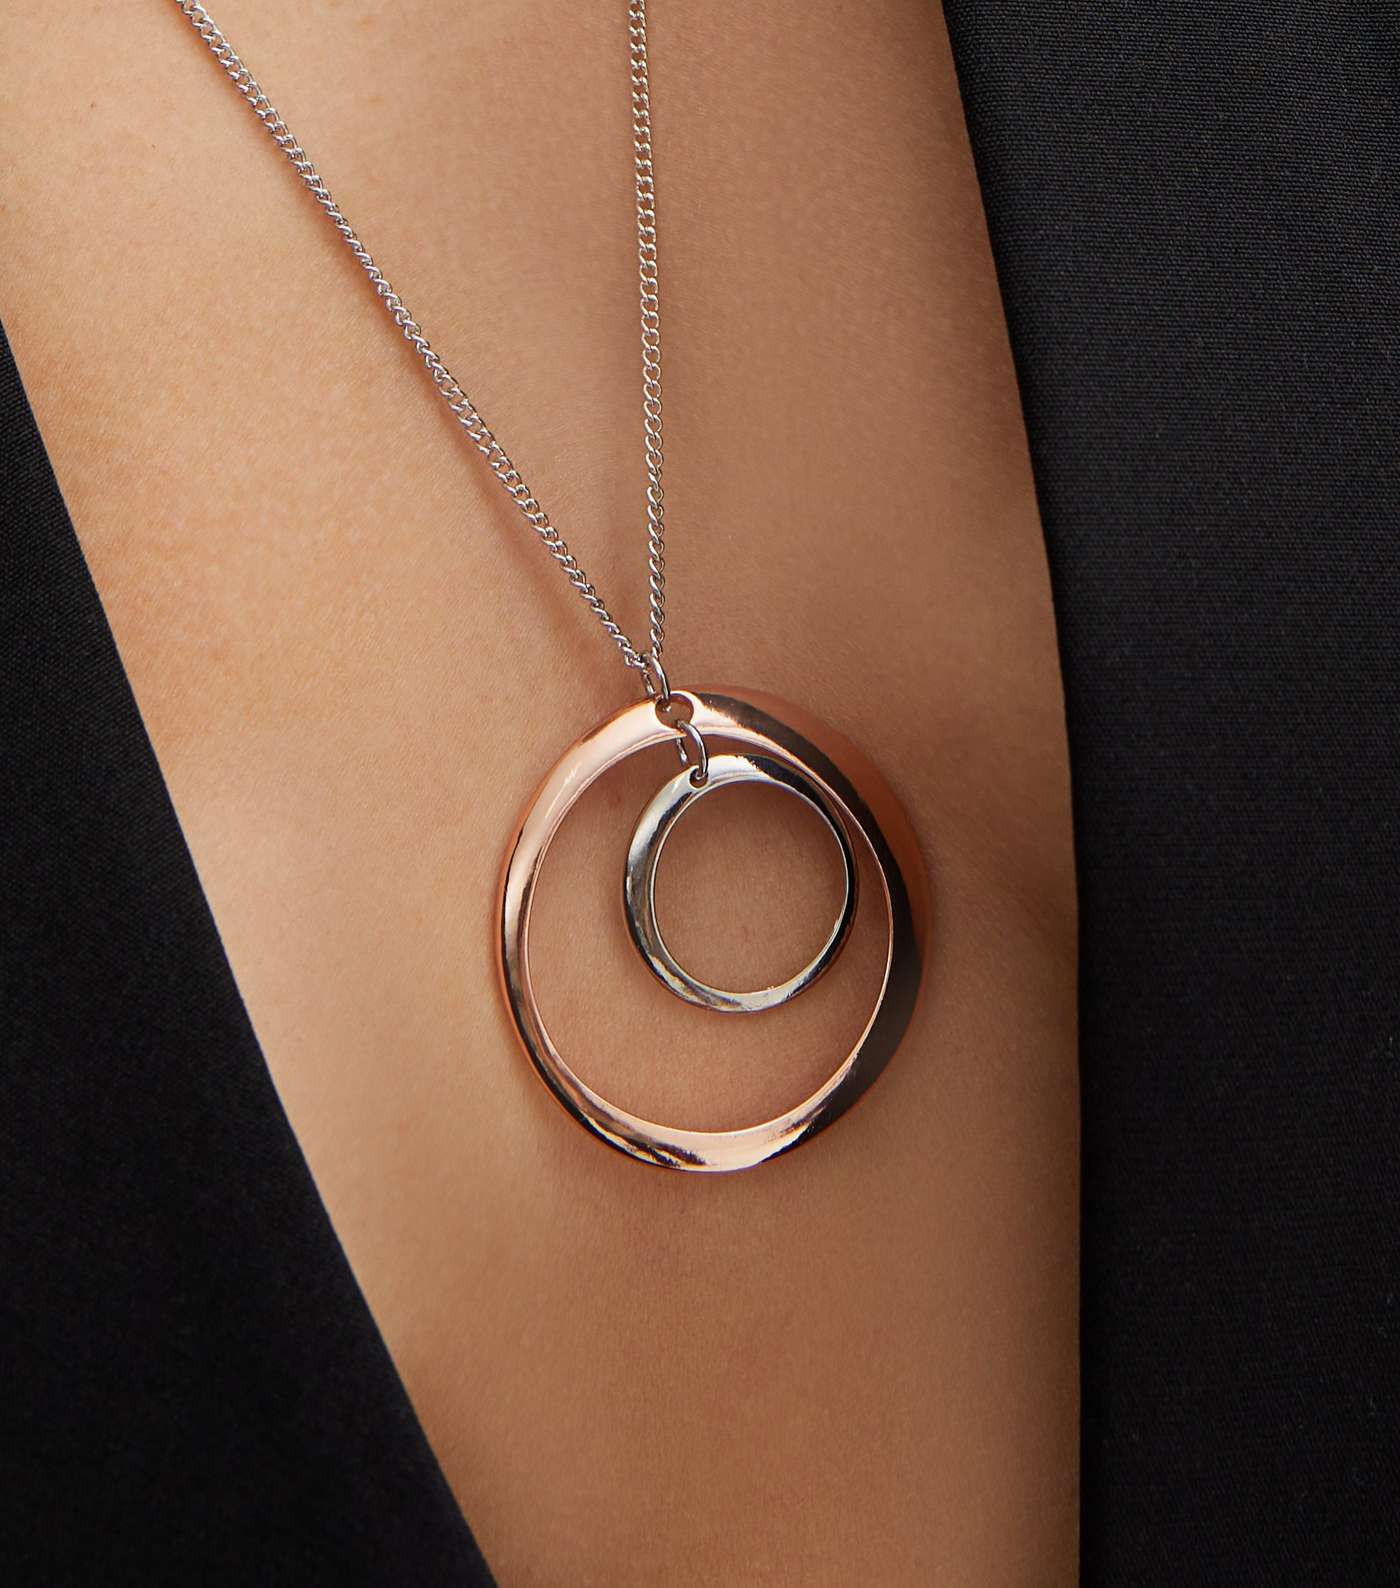 Silver and Gold Circle Long Pendant Necklace Image 2